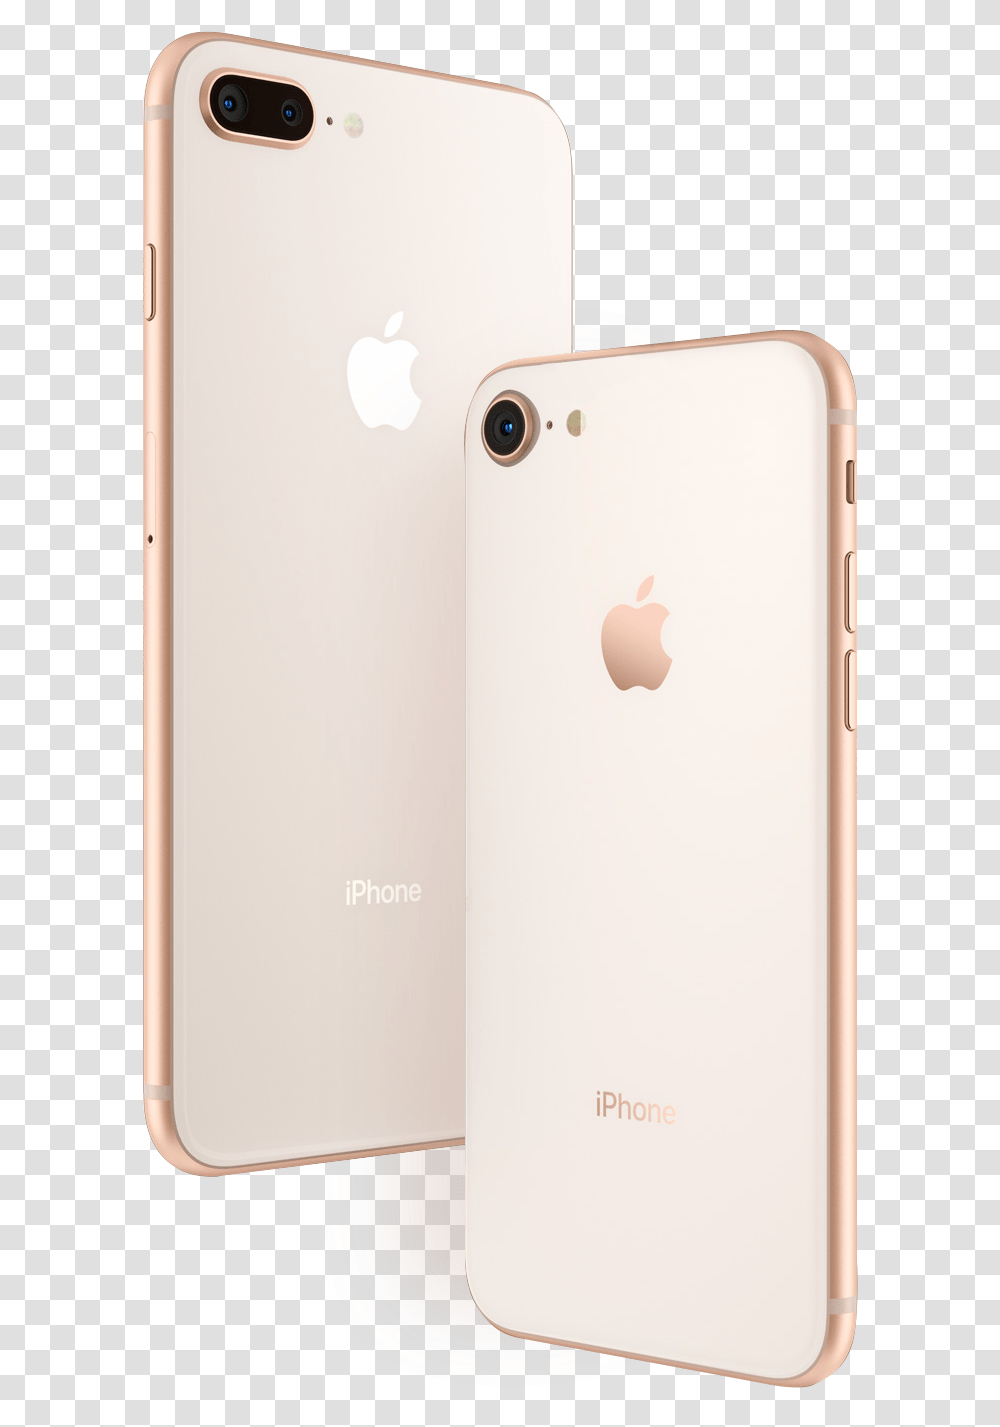 Iphone 8 Amp 8plus Side By Side Iphone 8 Price In Qatar, Mobile Phone, Electronics, Cell Phone Transparent Png